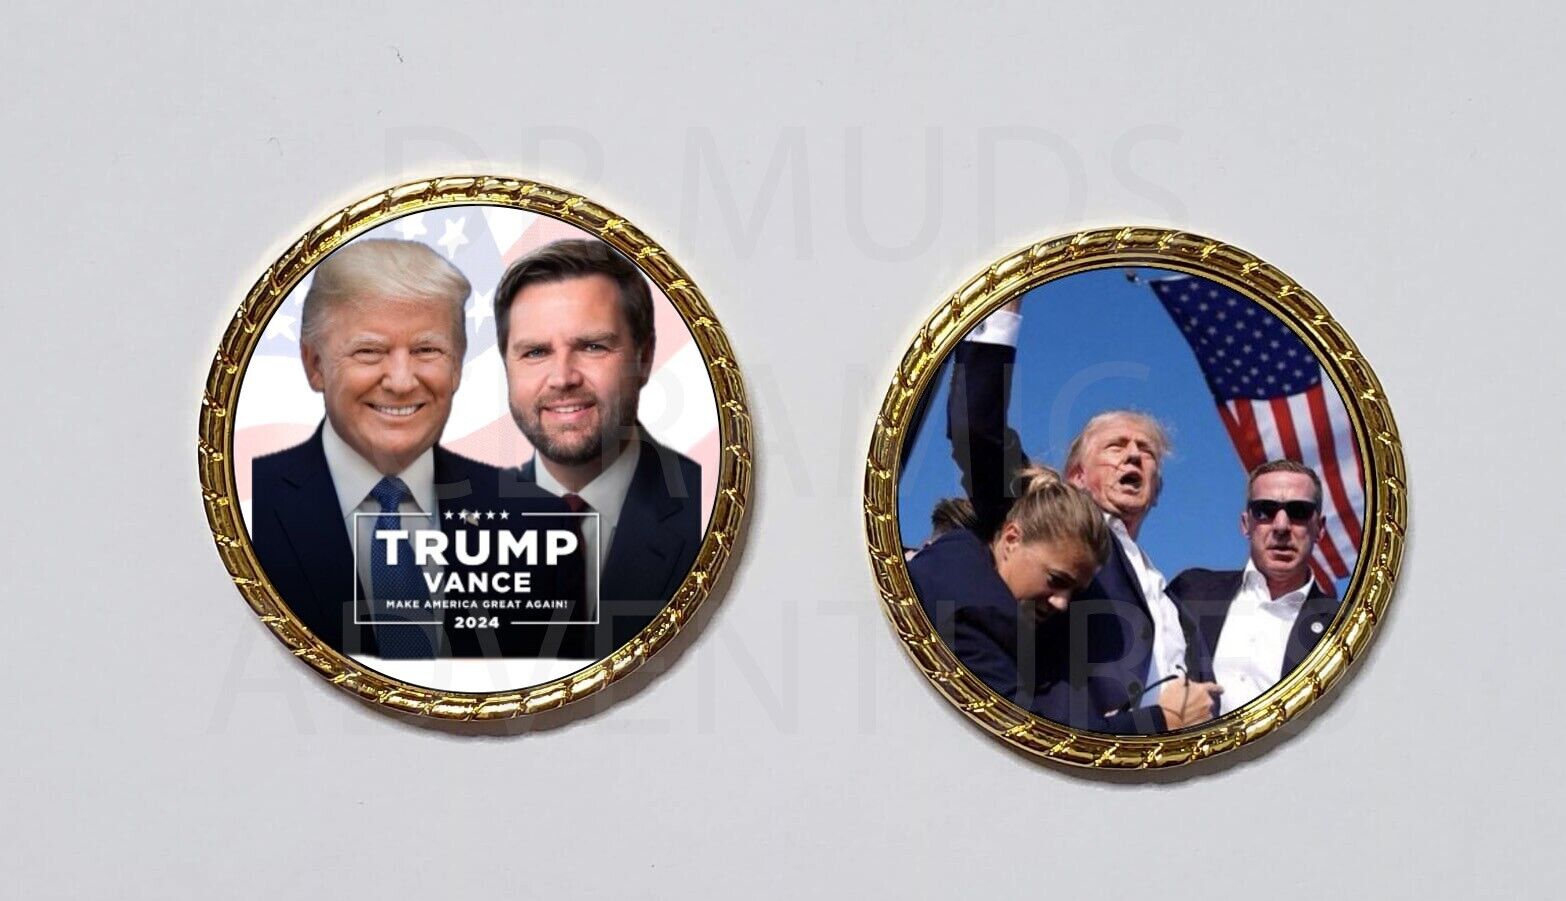 TRUMP VANCE 2024  GOP Campaign novelty coin